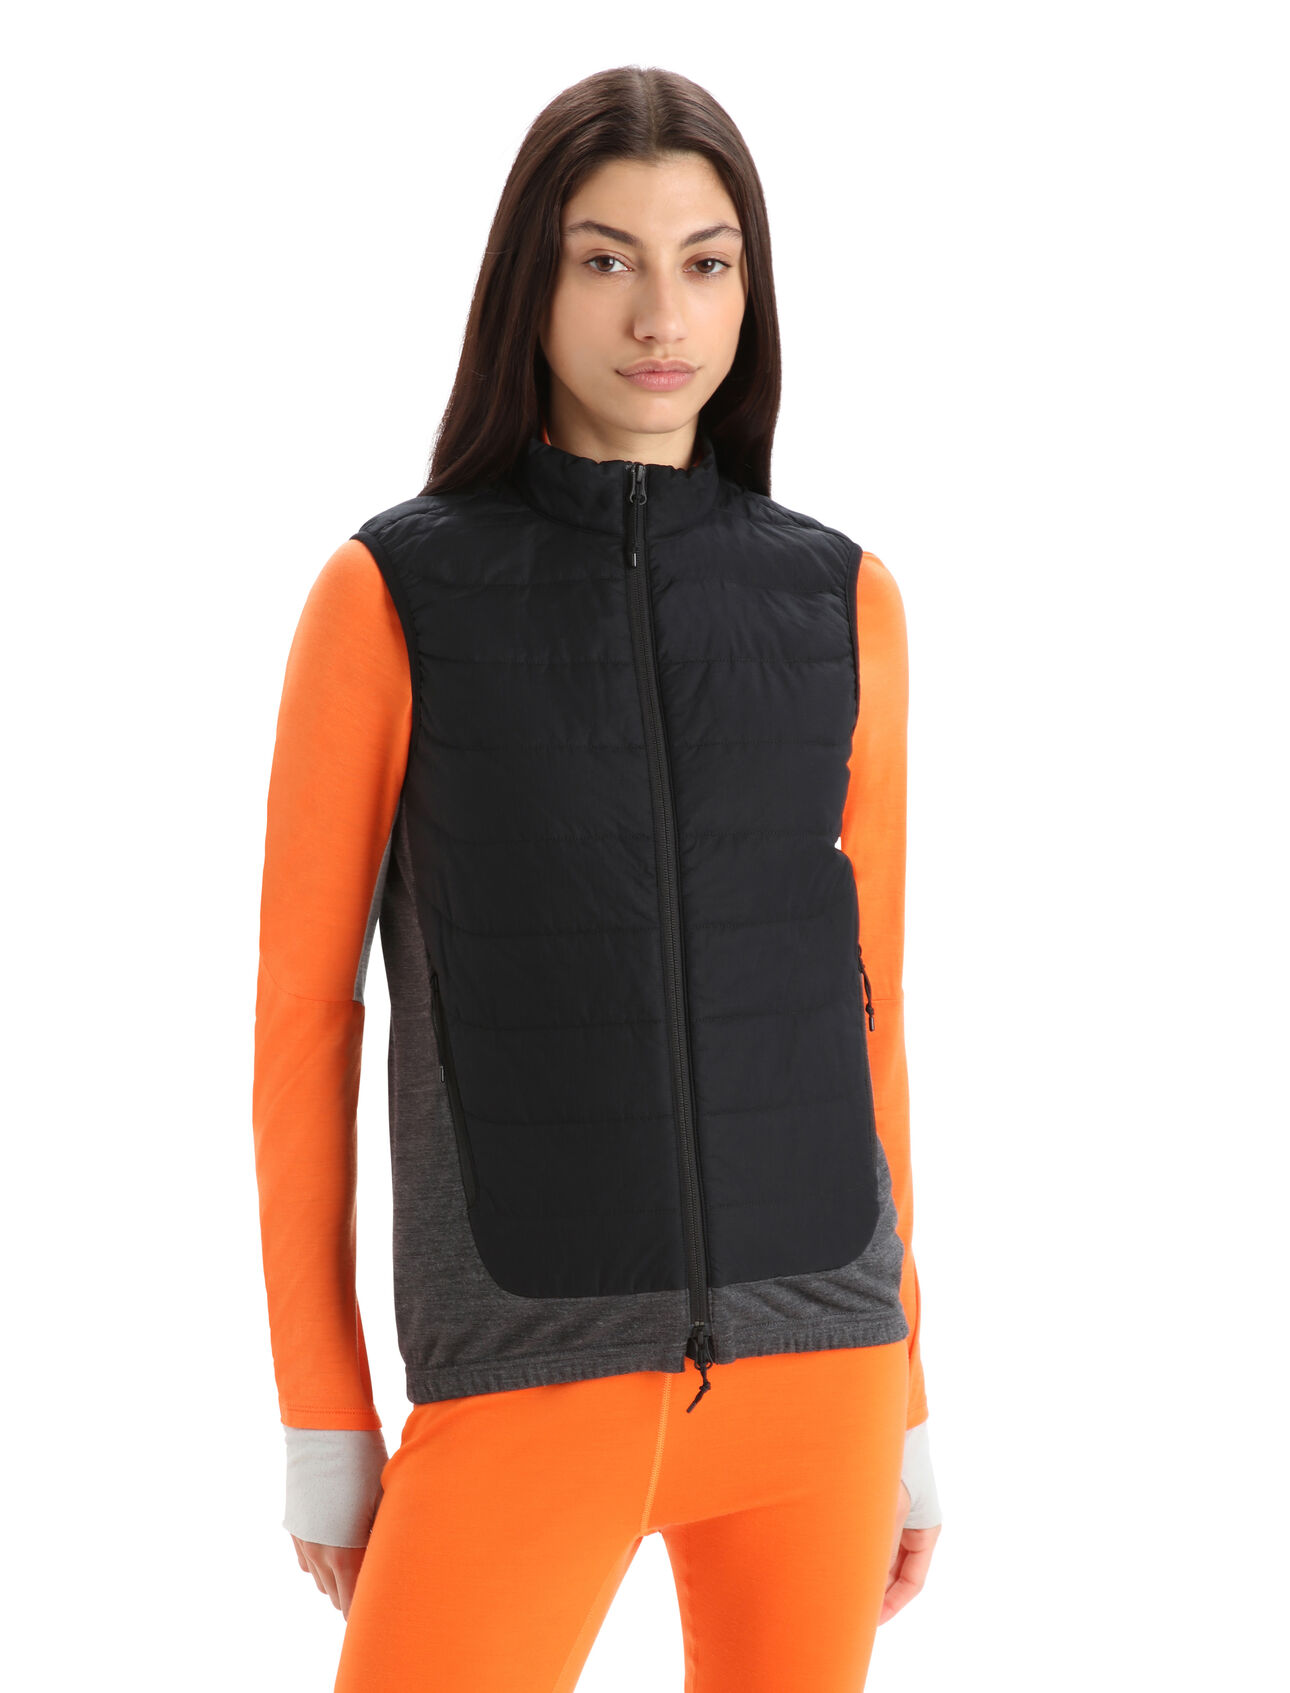 Womens MerinoLoft™ Vest A super-versatile layering piece filled with our innovative MerinoLoft™ merino insulation, the MerinoLoft™ Vest adds a solid dose of core warmth to any outdoor adventure.